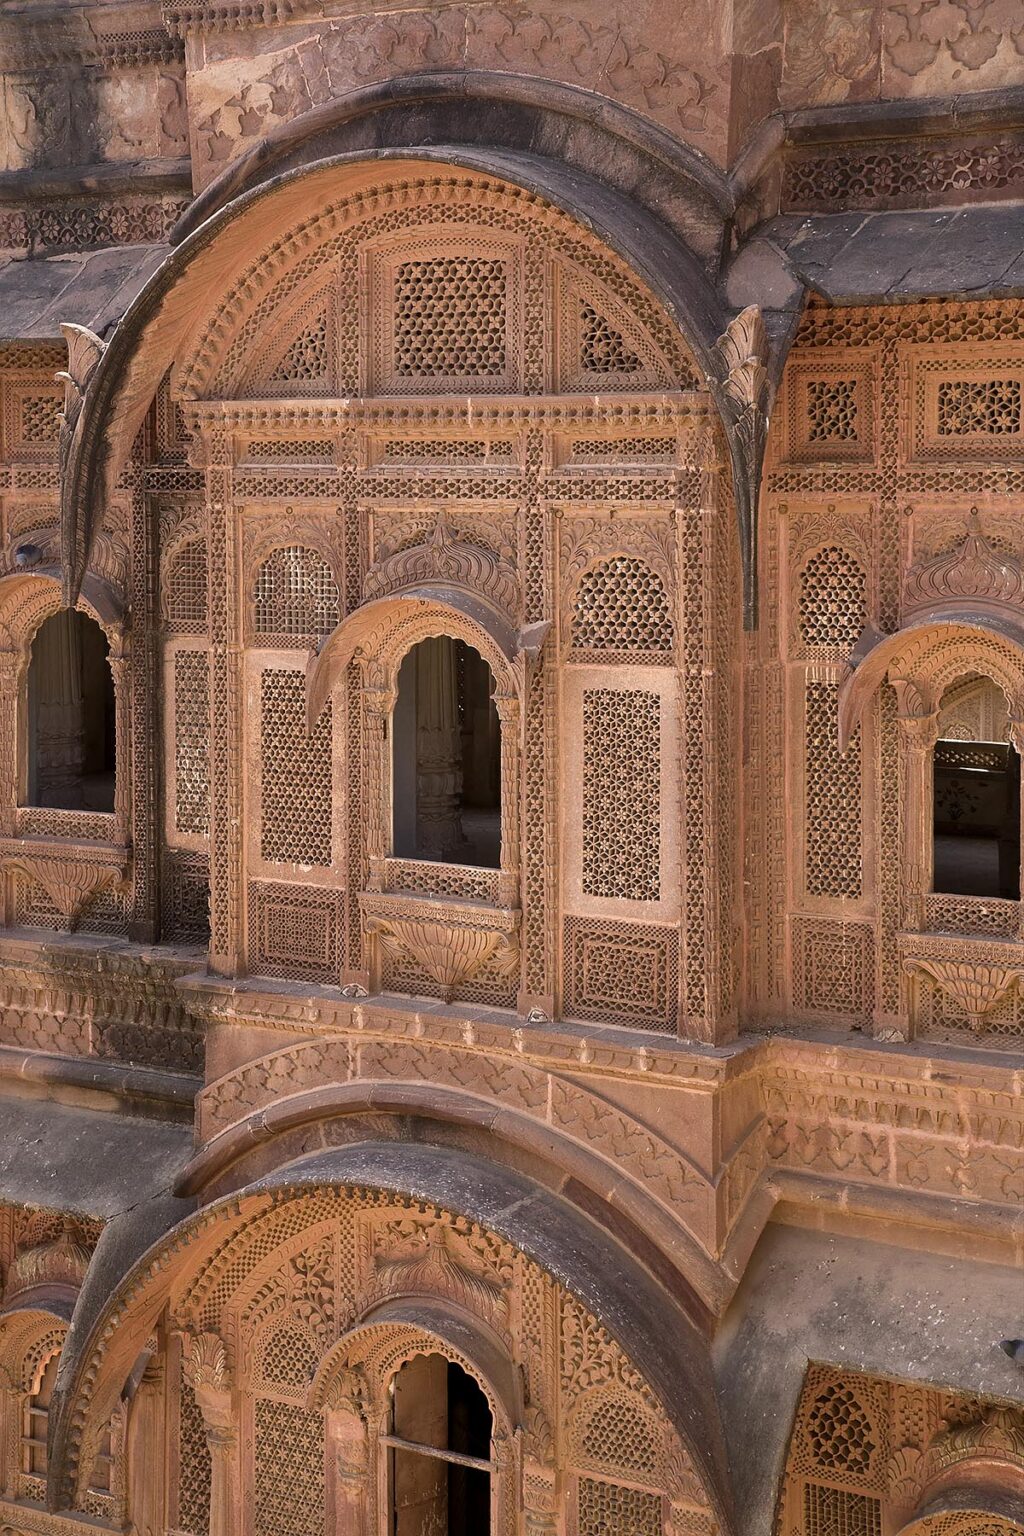 Stone carved windows at the MEHERANGARH FORT built by Maharaja Man Singh in 1806 - RAJASTHAN, INDIA